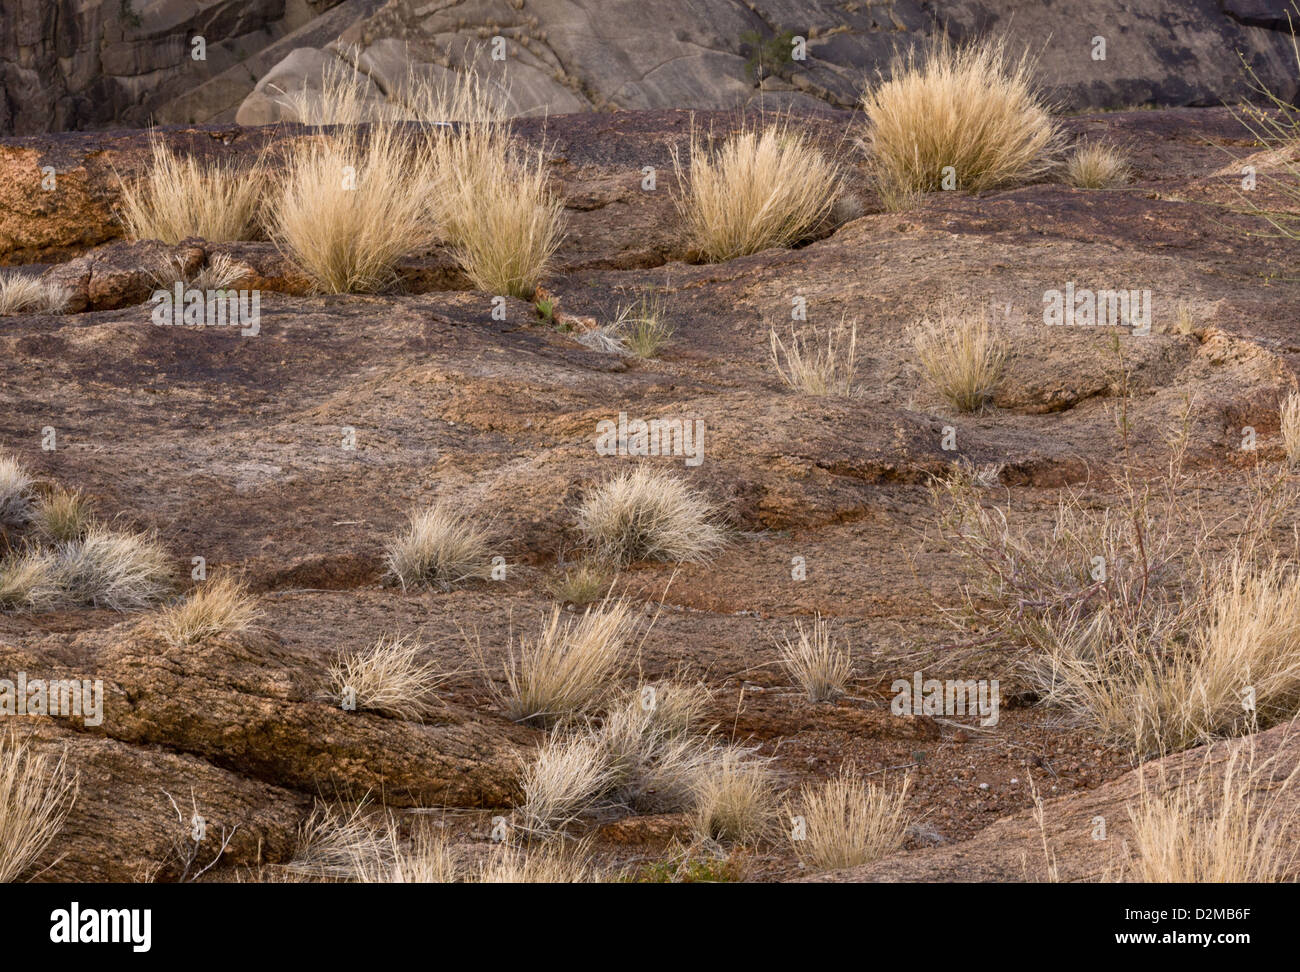 Dry grasses and granite in the Augrabies National Park, Northern Cape, South Africa Stock Photo